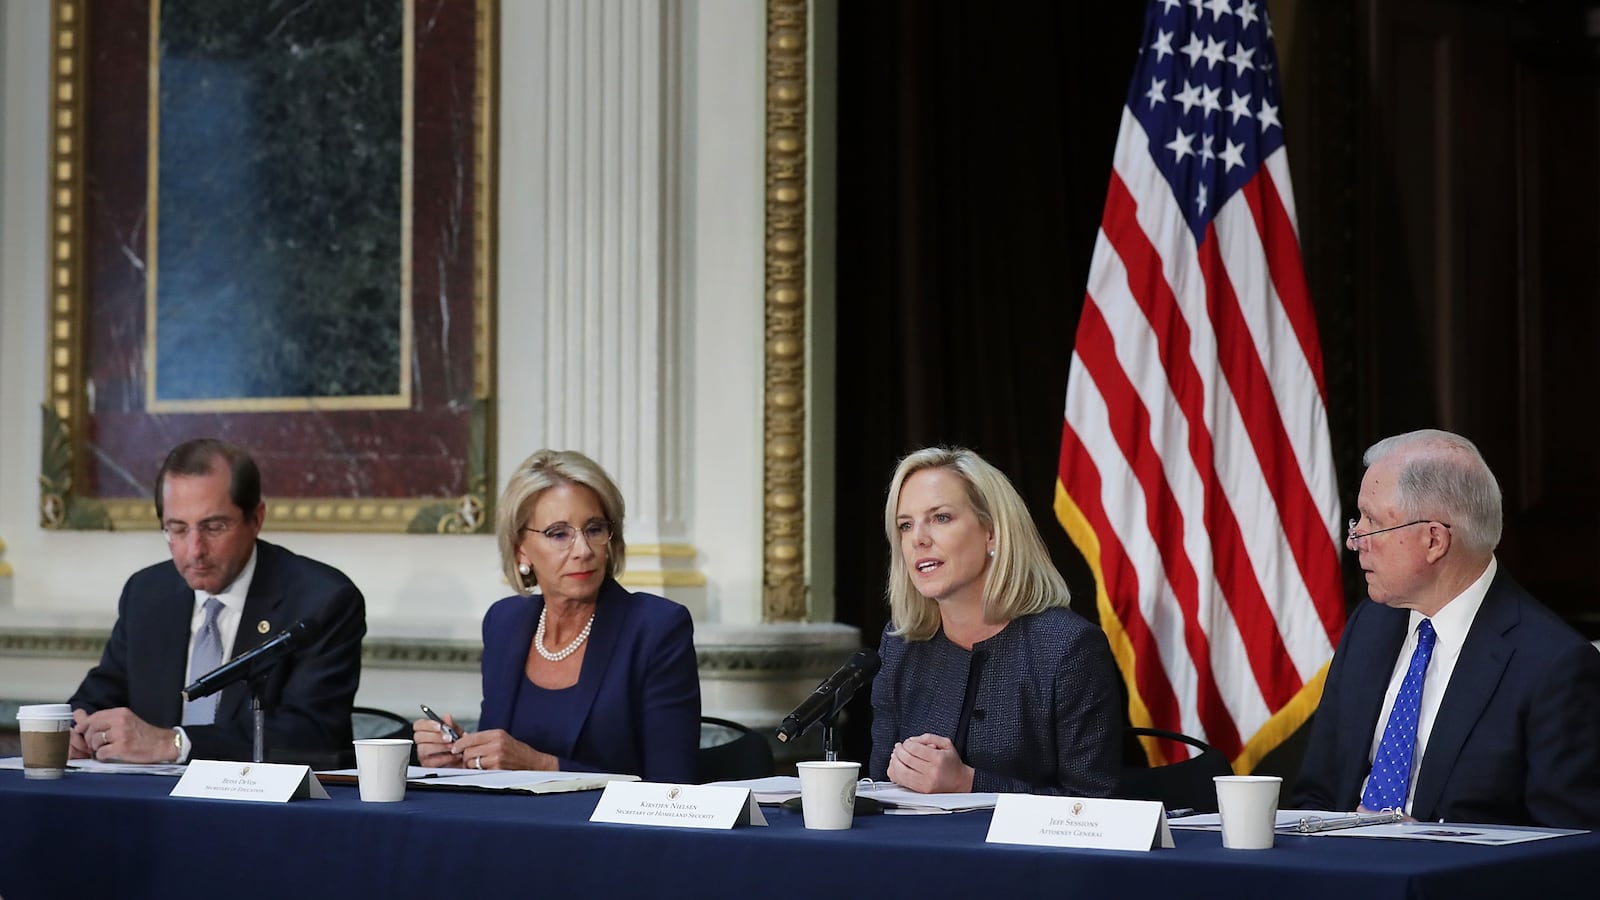 U.S. Health and Human Services Secretary Alex Azar, Education Secretary Betsy DeVos, Homeland Security Secretary Kirstjen Nielsen and Attorney General Jeff Sessions participate in a meeting of the Federal Commission on School Safety on August 16, 2018.   (Photo by Chip Somodevilla/Getty Images)